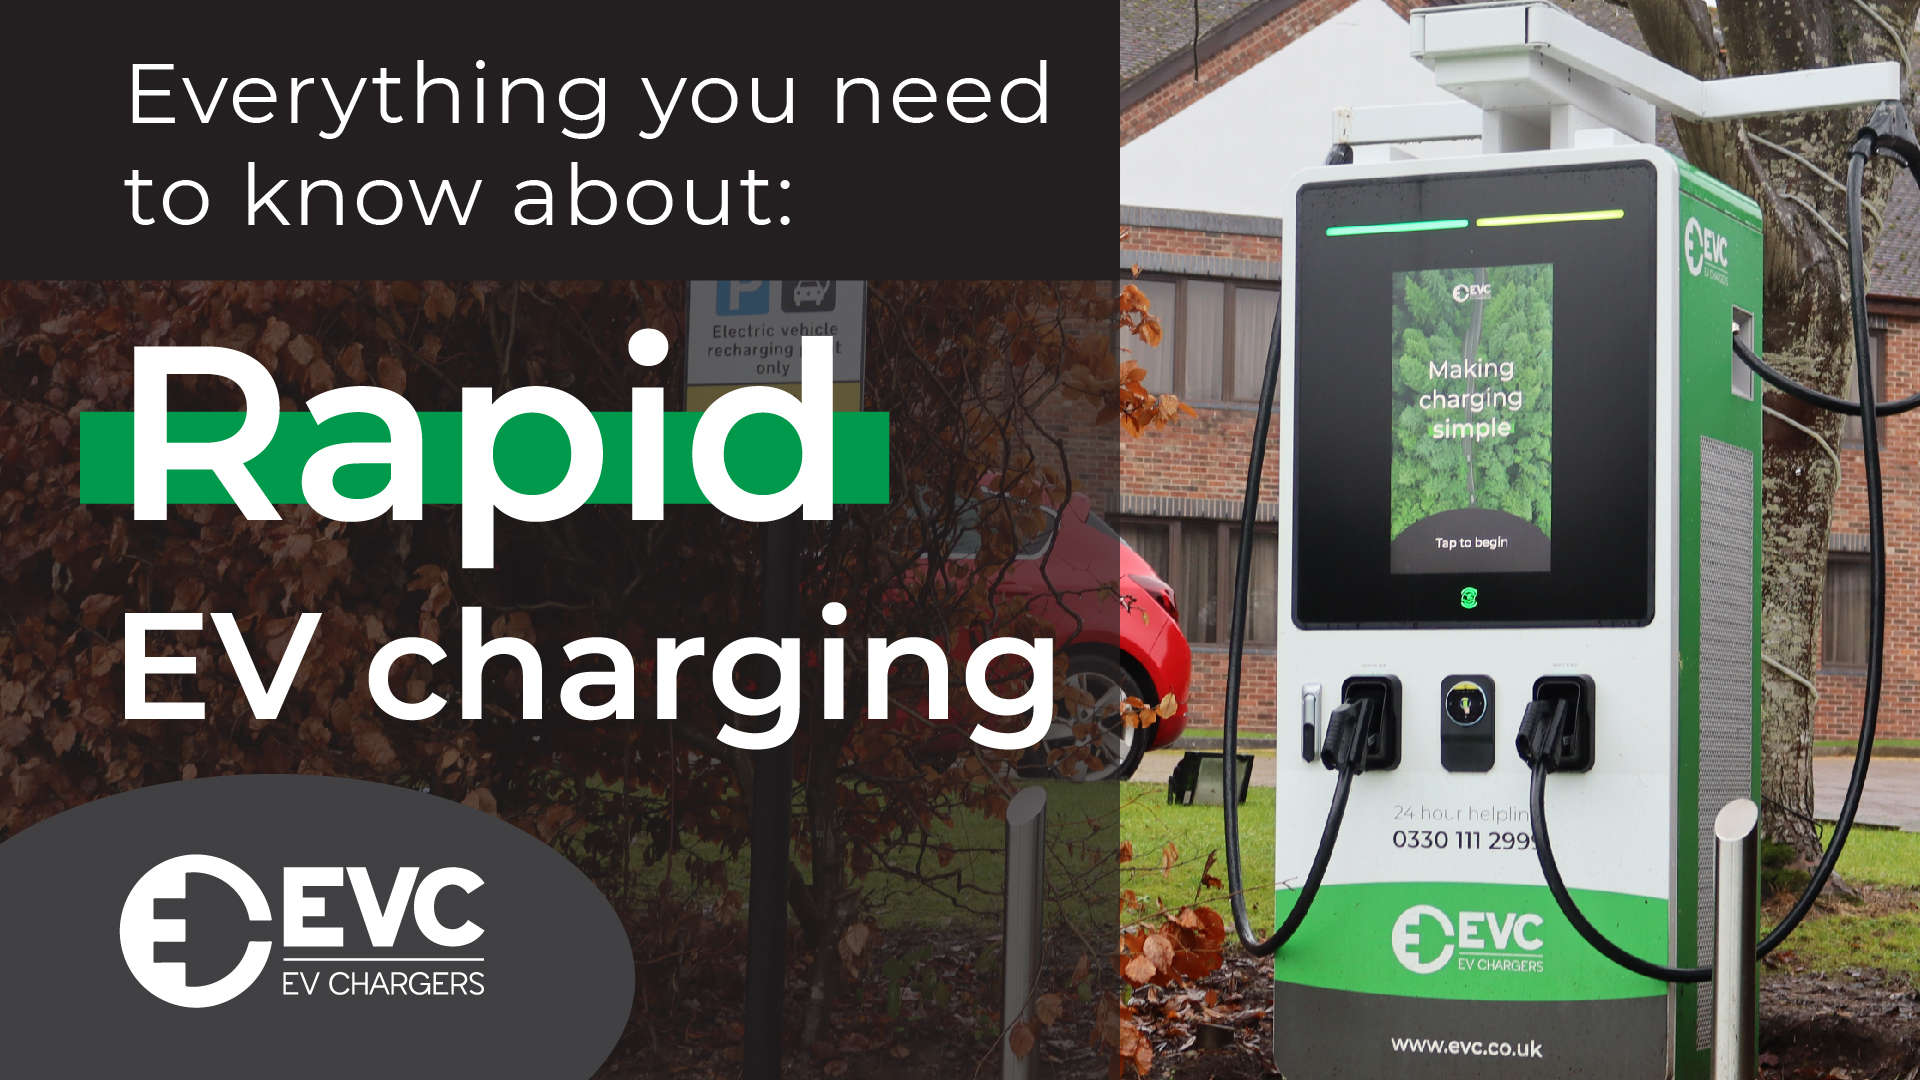 Everything You Need to Know About Rapid EV Charging